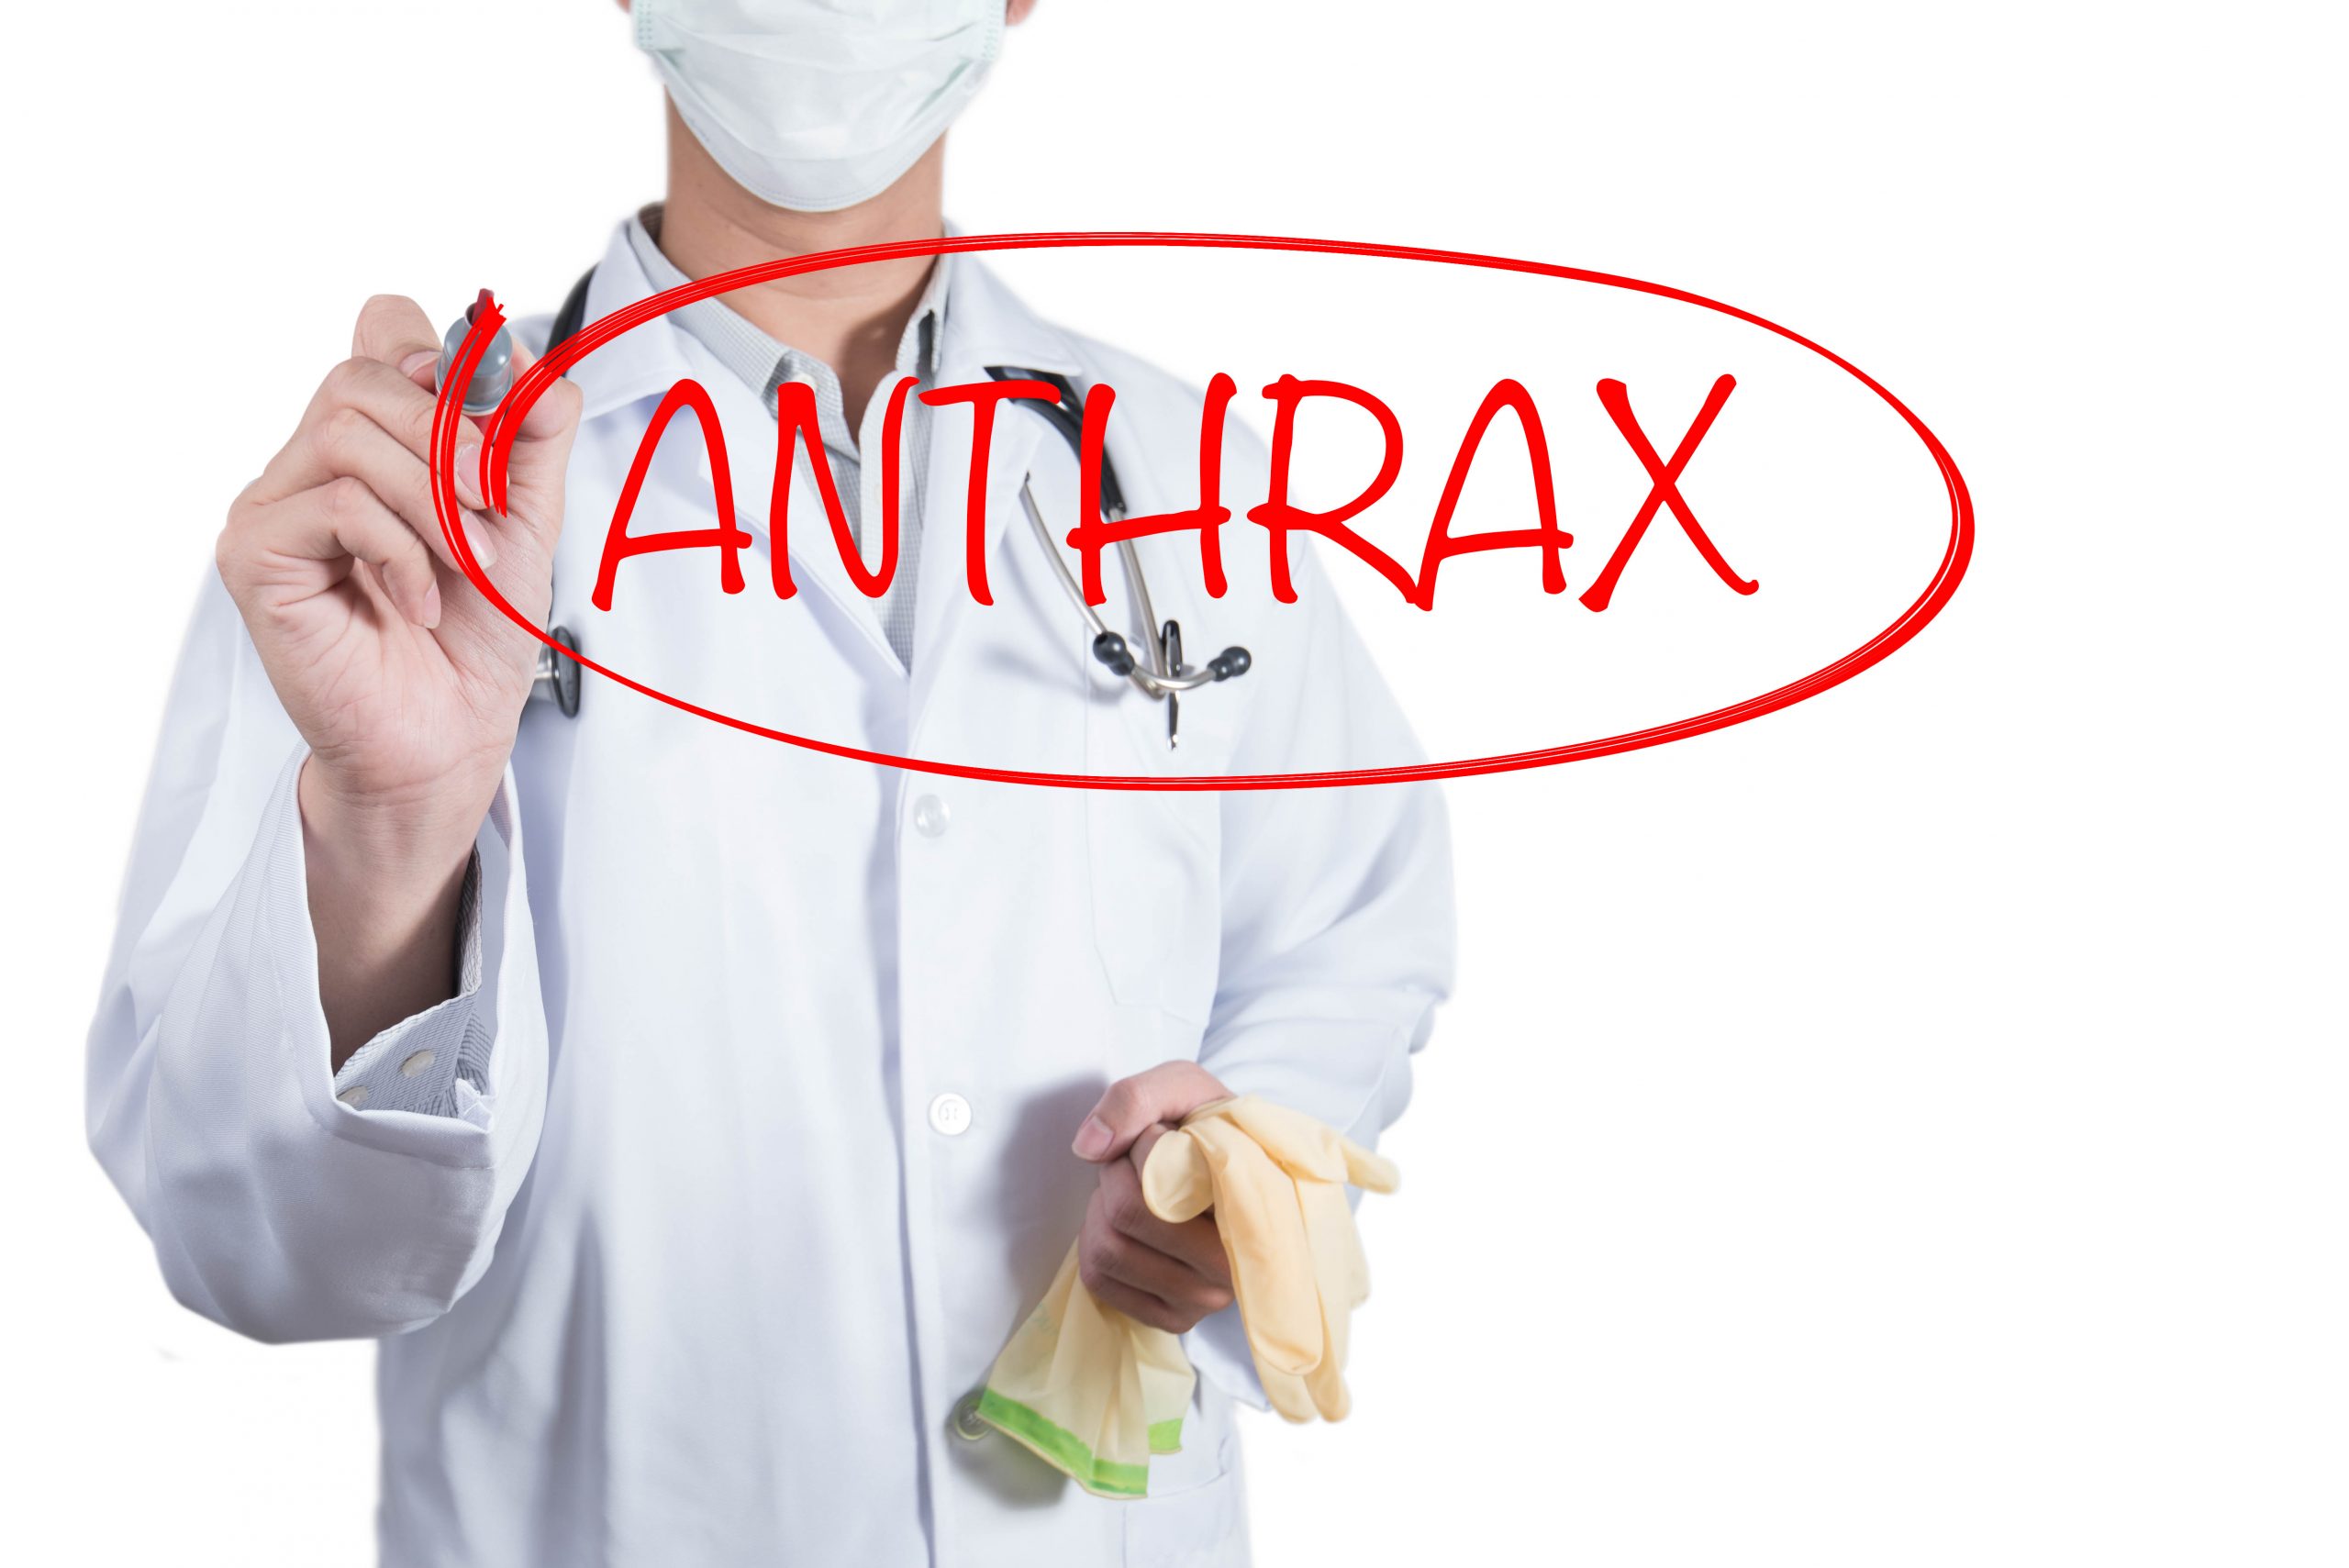 Anthrax as a Bioterror Weapon